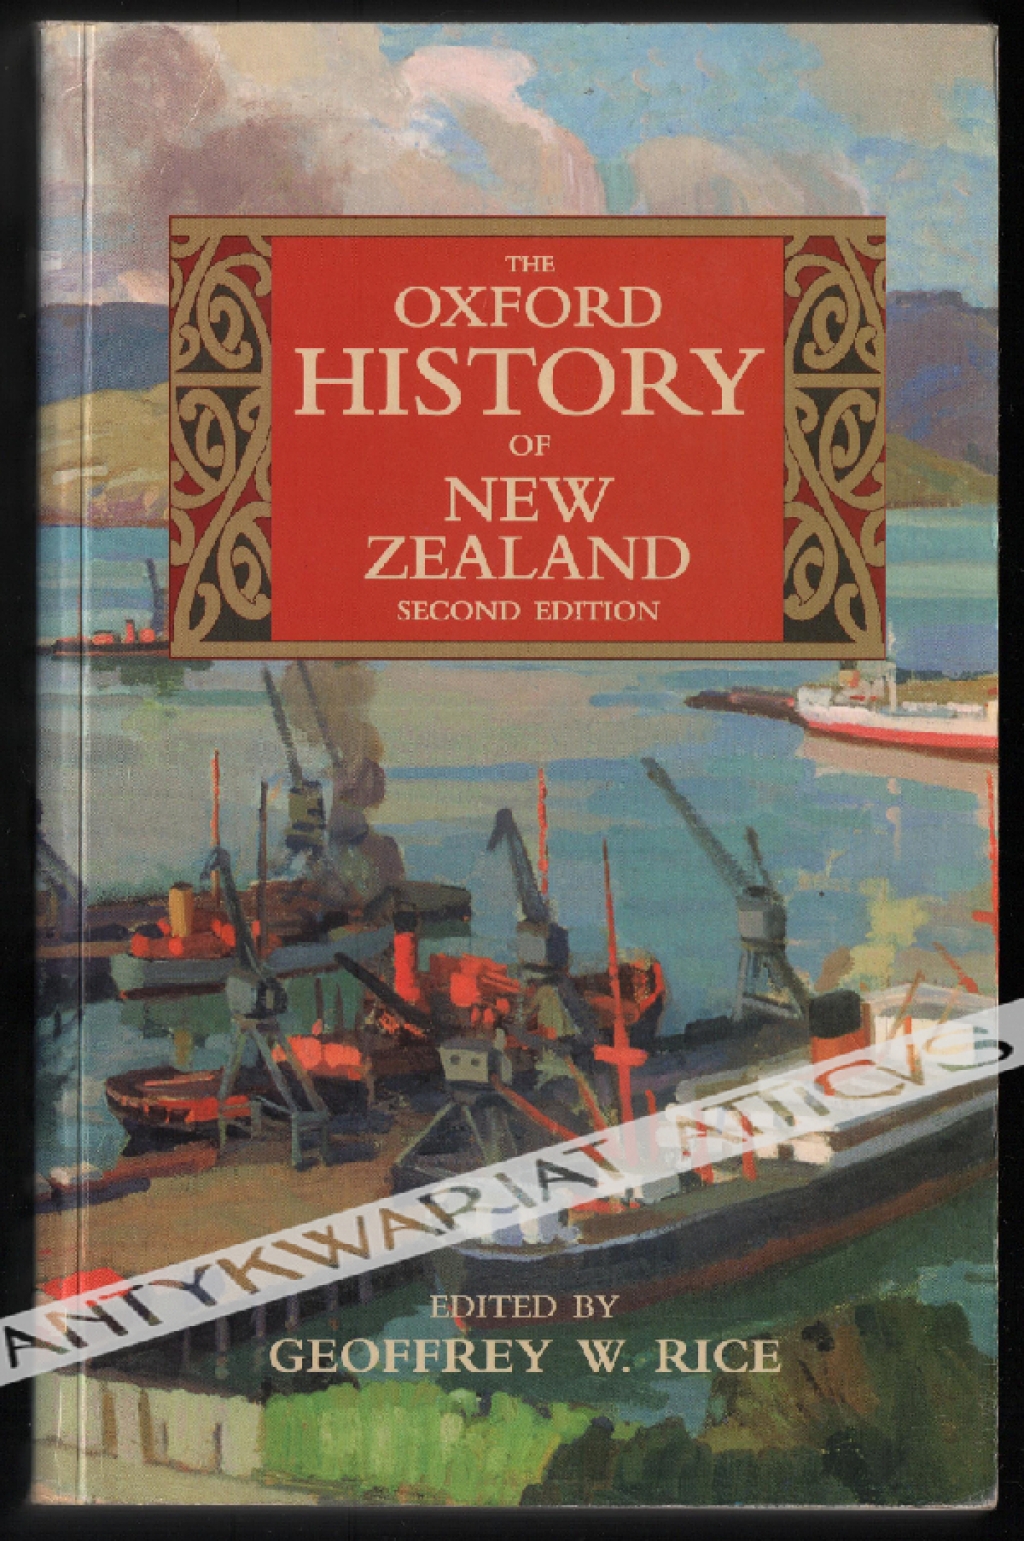 The Oxford history of New Zealand